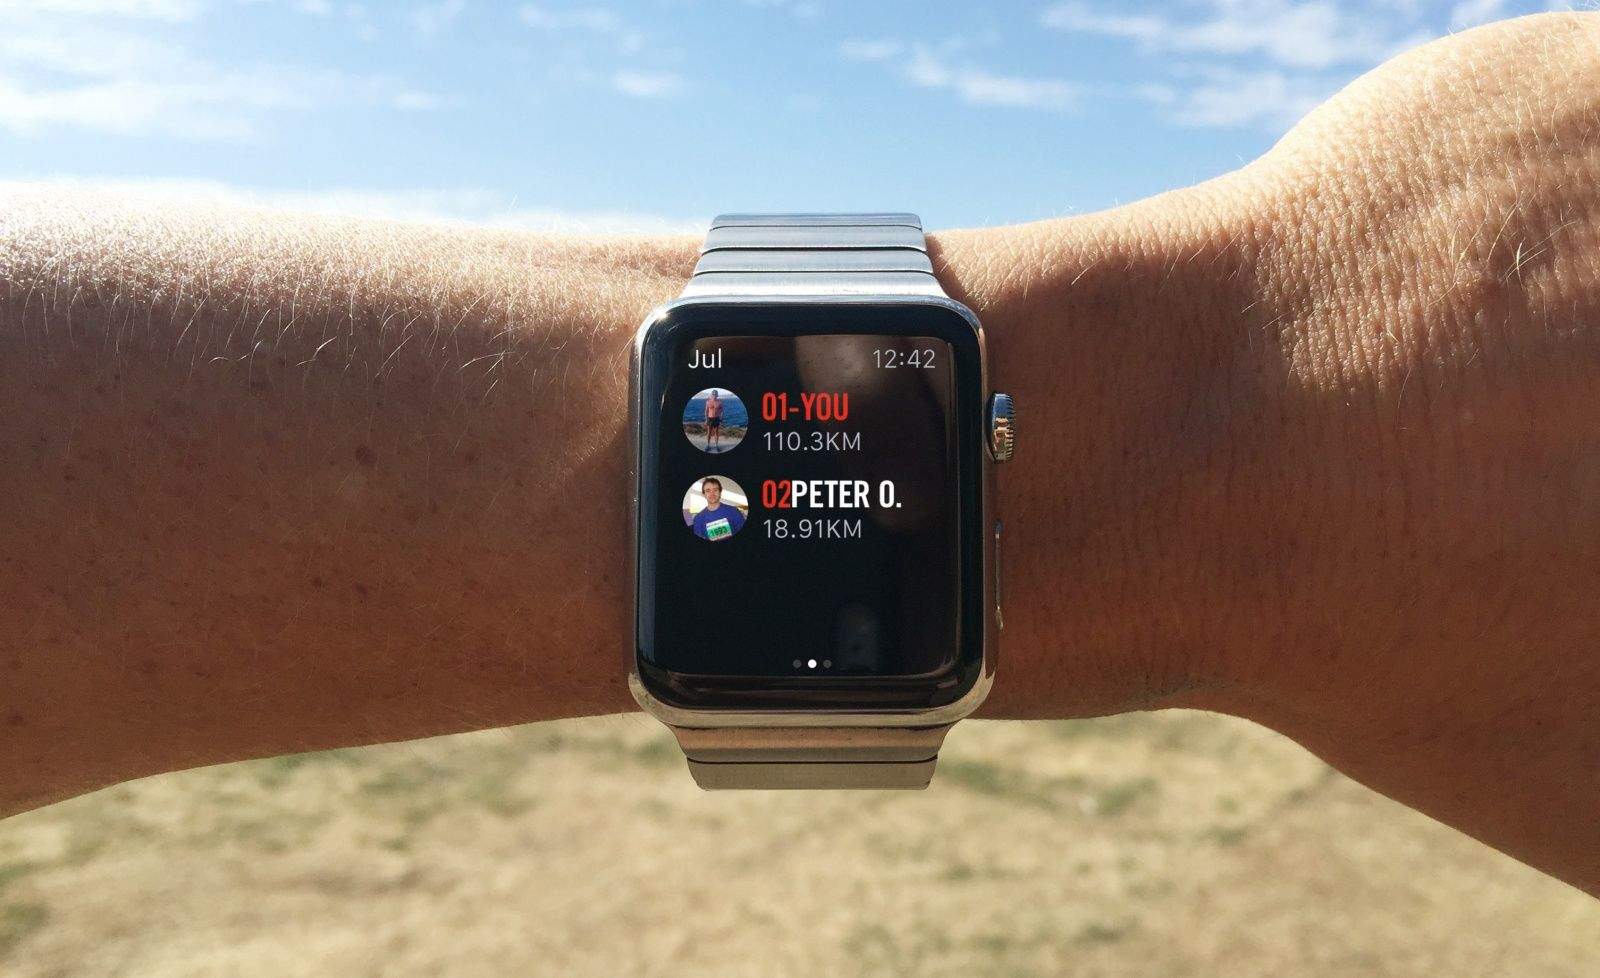 Nike+ shows your running buddies in a leaderboard. (Sorry Peter).